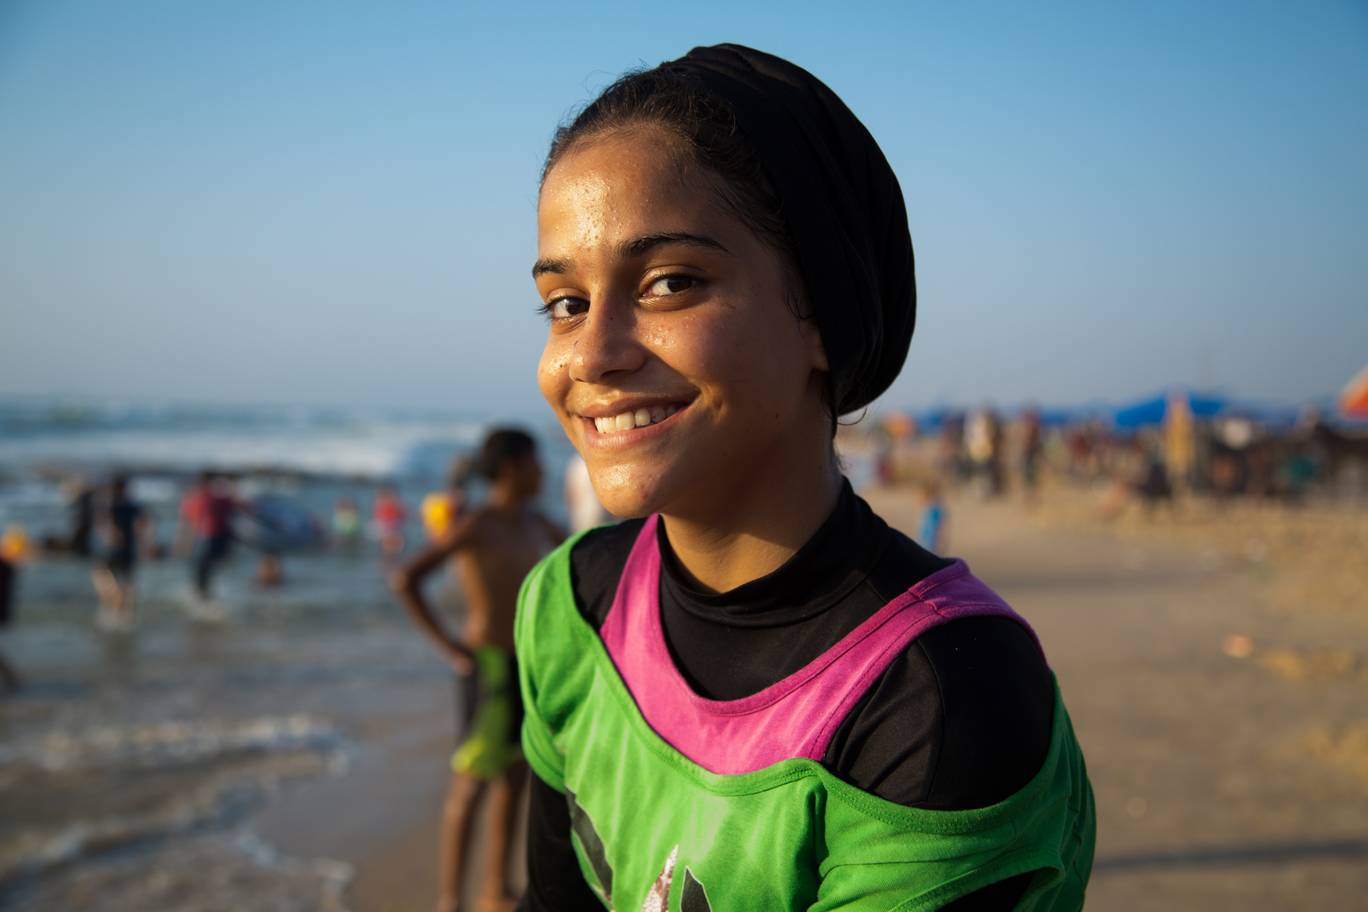 Palestinian Girl Dreams of Being Gaza’s First Olympic Swimmer